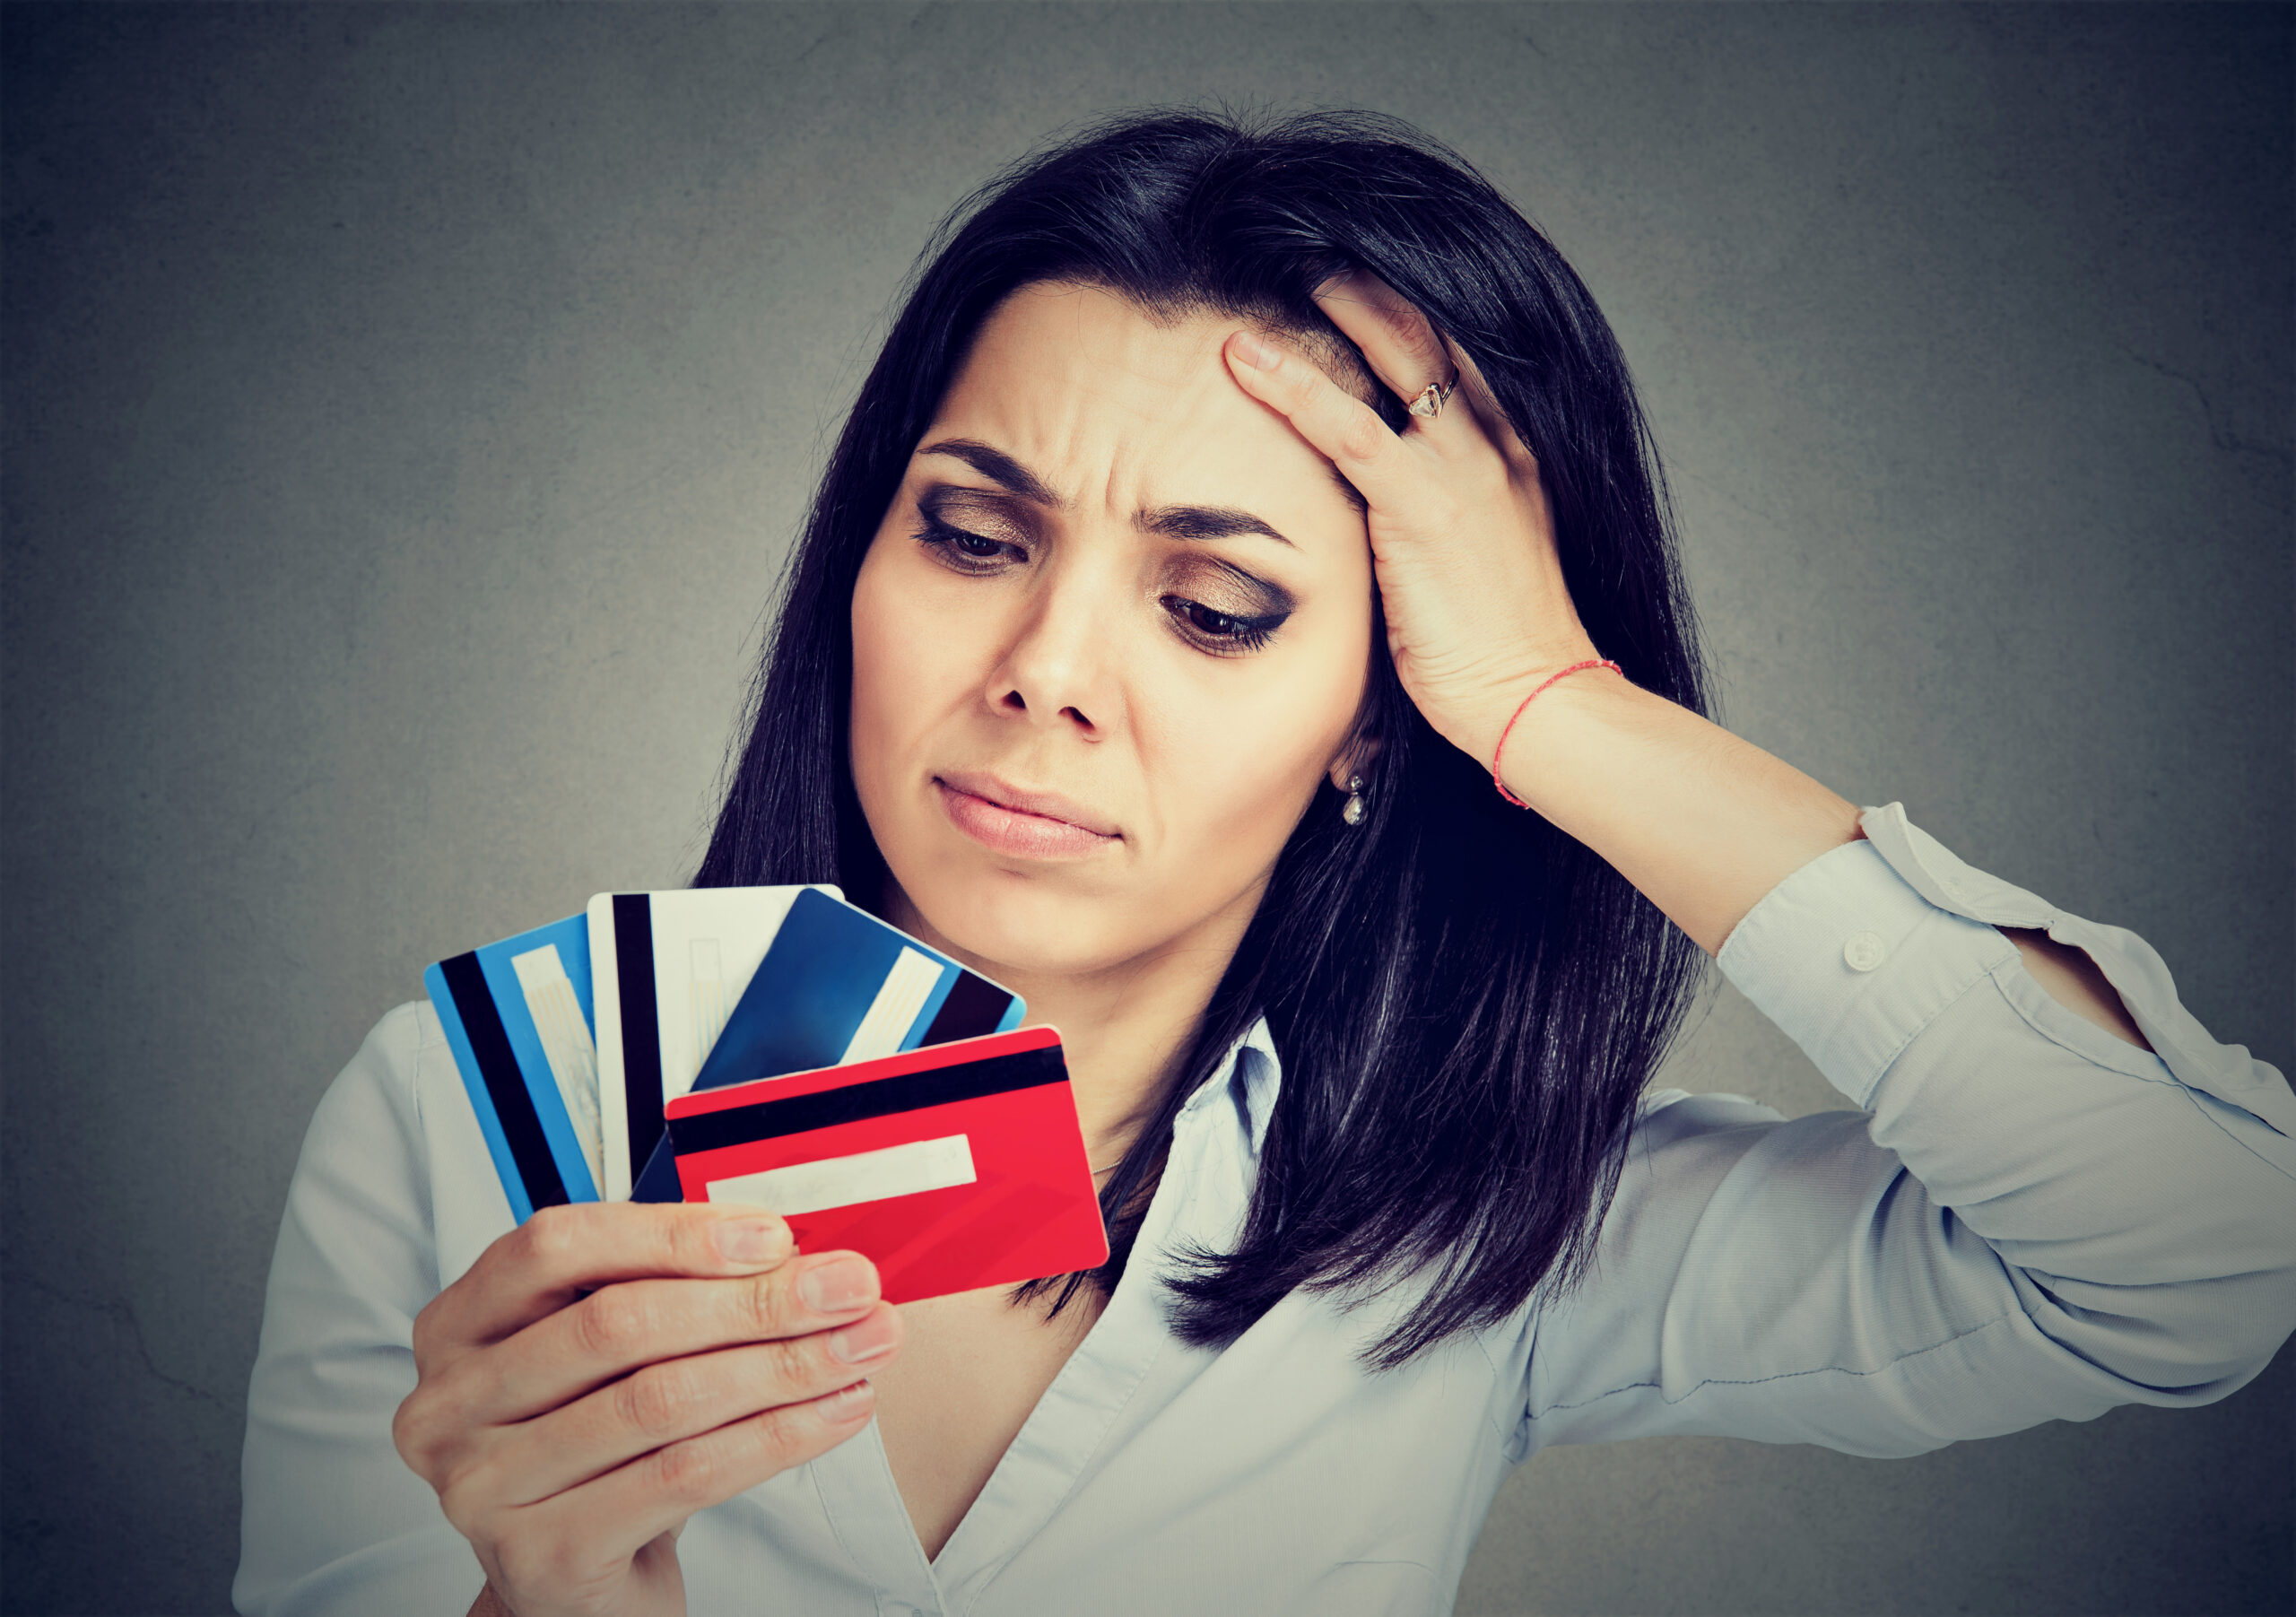 A woman holding several credit cards wondering how many credit cards is too many?